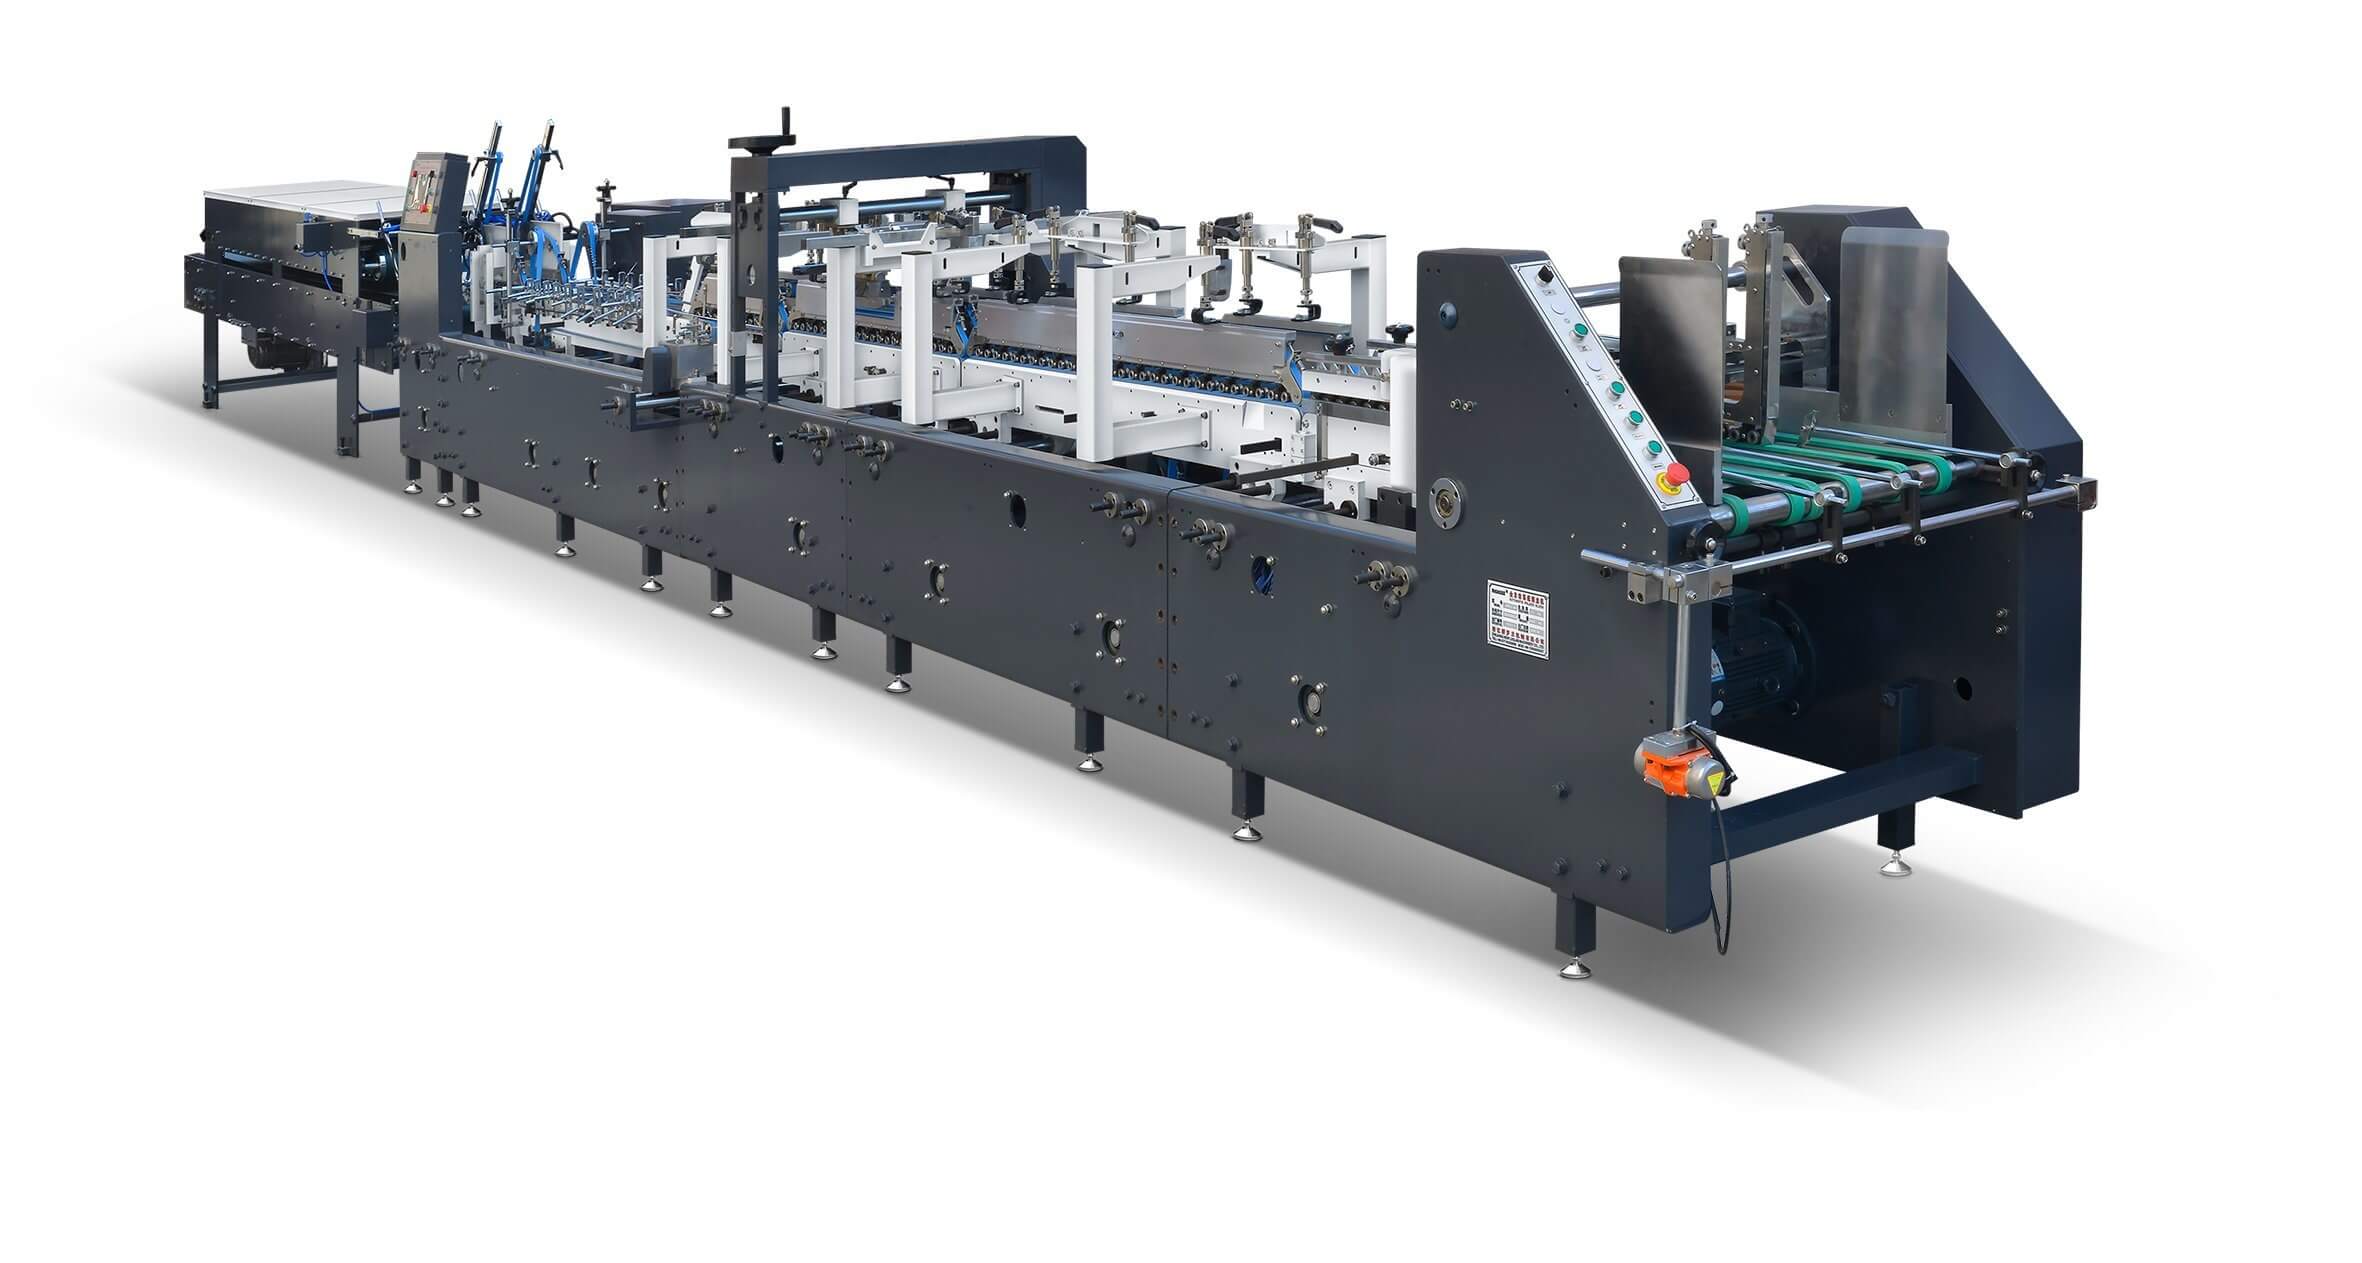 What are the advantages of using a folding carton machine